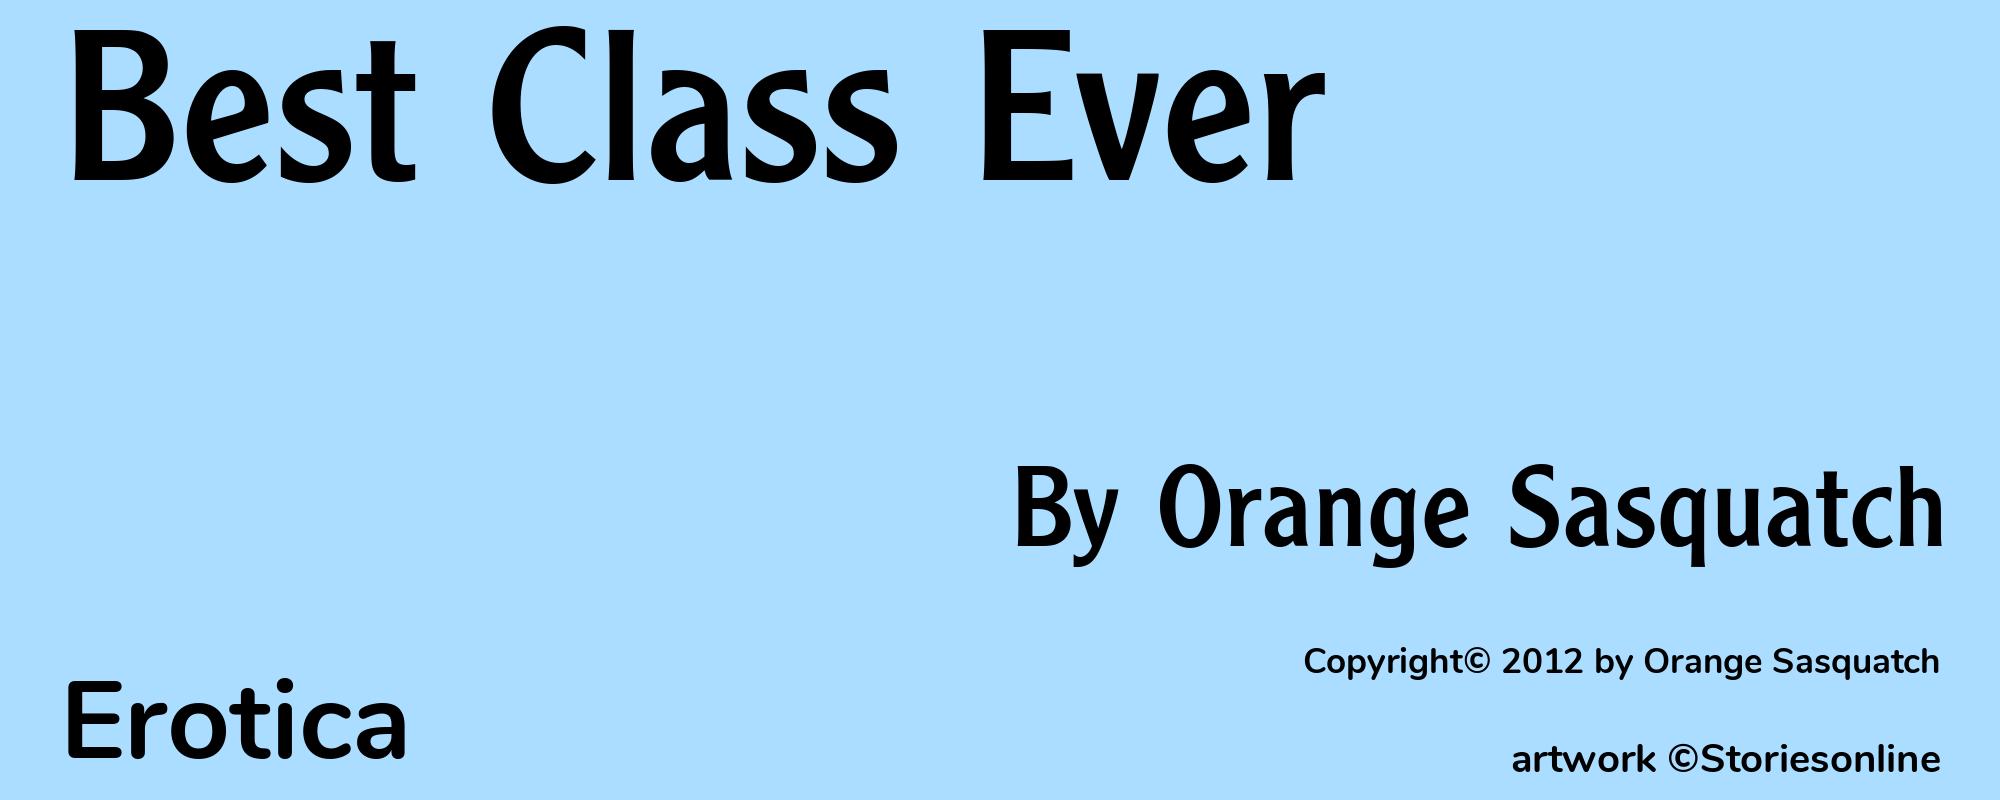 Best Class Ever - Cover